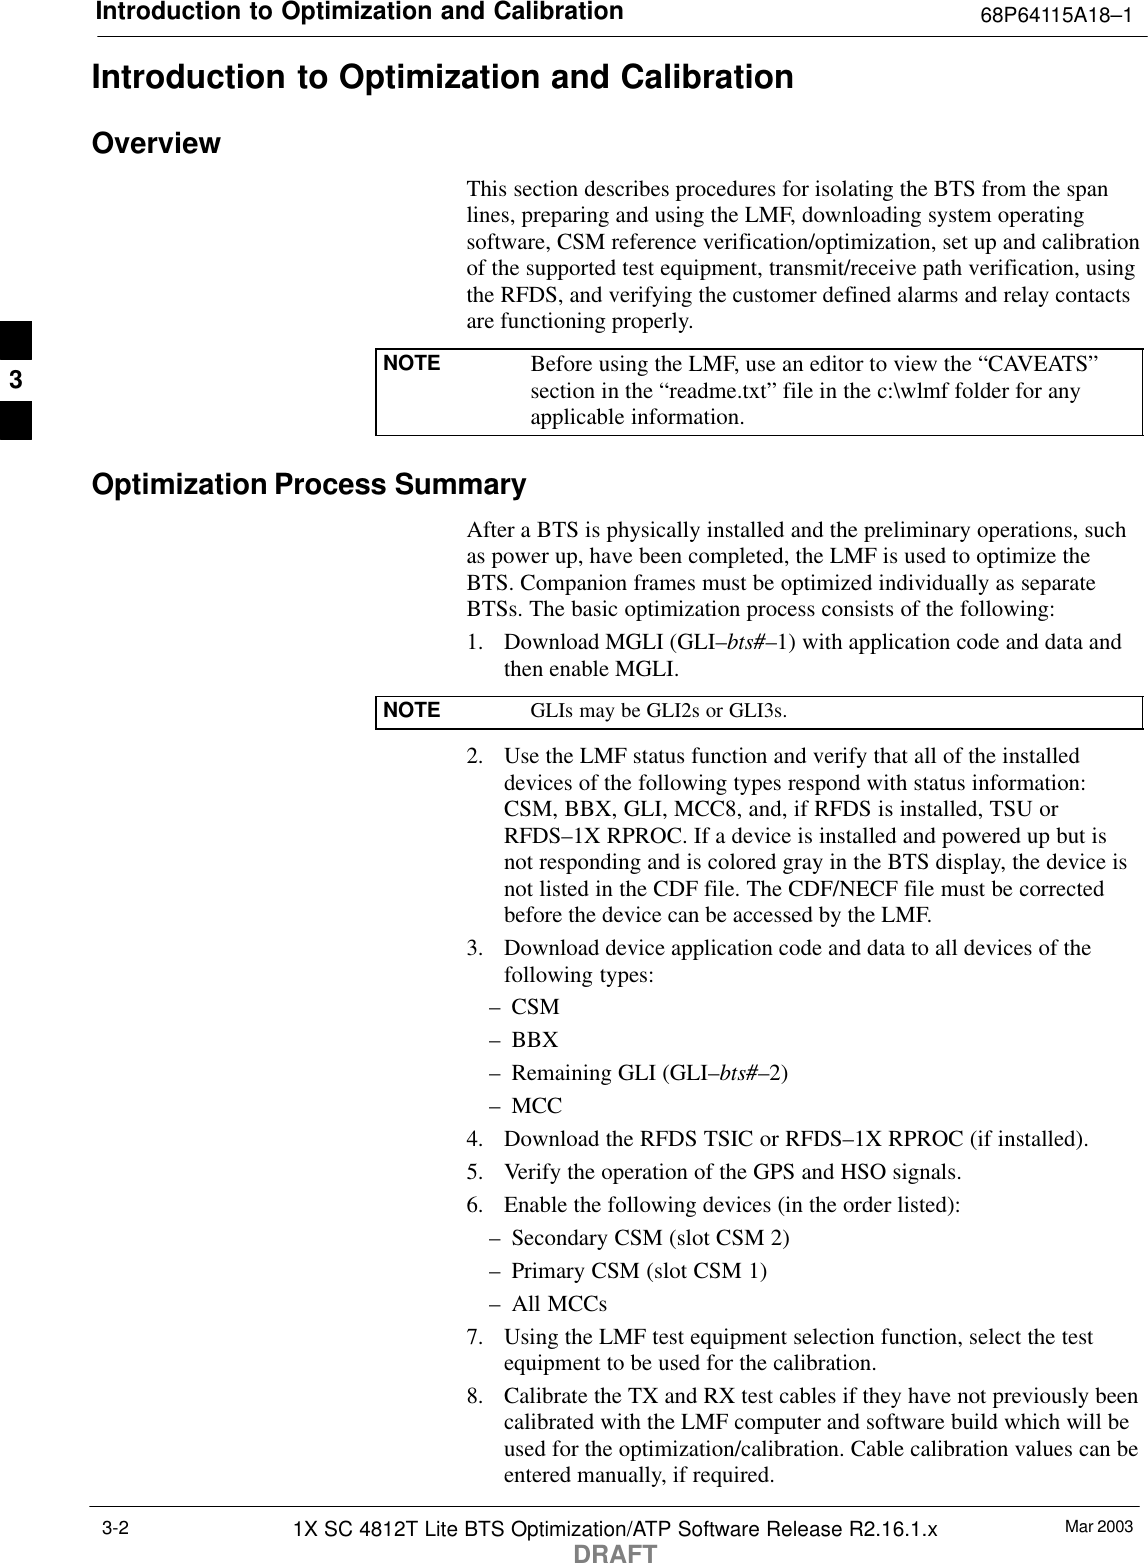 Introduction to Optimization and Calibration 68P64115A18–1Mar 20031X SC 4812T Lite BTS Optimization/ATP Software Release R2.16.1.xDRAFT3-2Introduction to Optimization and CalibrationOverviewThis section describes procedures for isolating the BTS from the spanlines, preparing and using the LMF, downloading system operatingsoftware, CSM reference verification/optimization, set up and calibrationof the supported test equipment, transmit/receive path verification, usingthe RFDS, and verifying the customer defined alarms and relay contactsare functioning properly.NOTE Before using the LMF, use an editor to view the “CAVEATS”section in the “readme.txt” file in the c:\wlmf folder for anyapplicable information.Optimization Process SummaryAfter a BTS is physically installed and the preliminary operations, suchas power up, have been completed, the LMF is used to optimize theBTS. Companion frames must be optimized individually as separateBTSs. The basic optimization process consists of the following:1. Download MGLI (GLI–bts#–1) with application code and data andthen enable MGLI.NOTE GLIs may be GLI2s or GLI3s.2. Use the LMF status function and verify that all of the installeddevices of the following types respond with status information:CSM, BBX, GLI, MCC8, and, if RFDS is installed, TSU orRFDS–1X RPROC. If a device is installed and powered up but isnot responding and is colored gray in the BTS display, the device isnot listed in the CDF file. The CDF/NECF file must be correctedbefore the device can be accessed by the LMF.3. Download device application code and data to all devices of thefollowing types:– CSM– BBX– Remaining GLI (GLI–bts#–2)– MCC4. Download the RFDS TSIC or RFDS–1X RPROC (if installed).5. Verify the operation of the GPS and HSO signals.6. Enable the following devices (in the order listed):– Secondary CSM (slot CSM 2)– Primary CSM (slot CSM 1)– All MCCs7. Using the LMF test equipment selection function, select the testequipment to be used for the calibration.8. Calibrate the TX and RX test cables if they have not previously beencalibrated with the LMF computer and software build which will beused for the optimization/calibration. Cable calibration values can beentered manually, if required.3